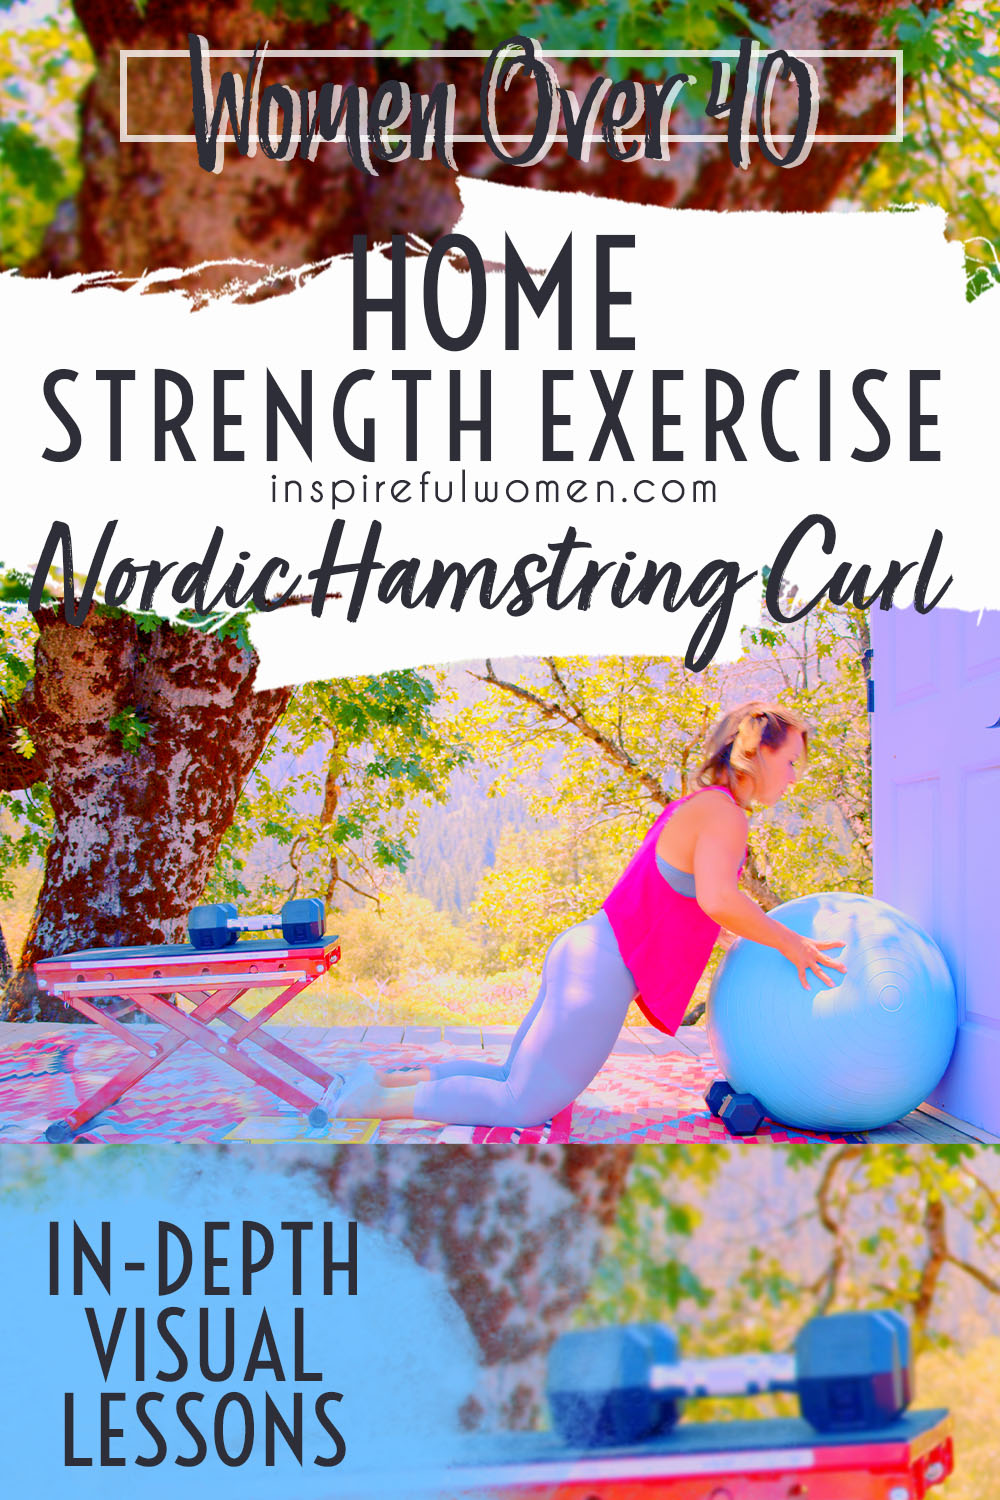 nordic-hamstring-curl-at-home-eccentric-fall-on-stability-ball-workout-women